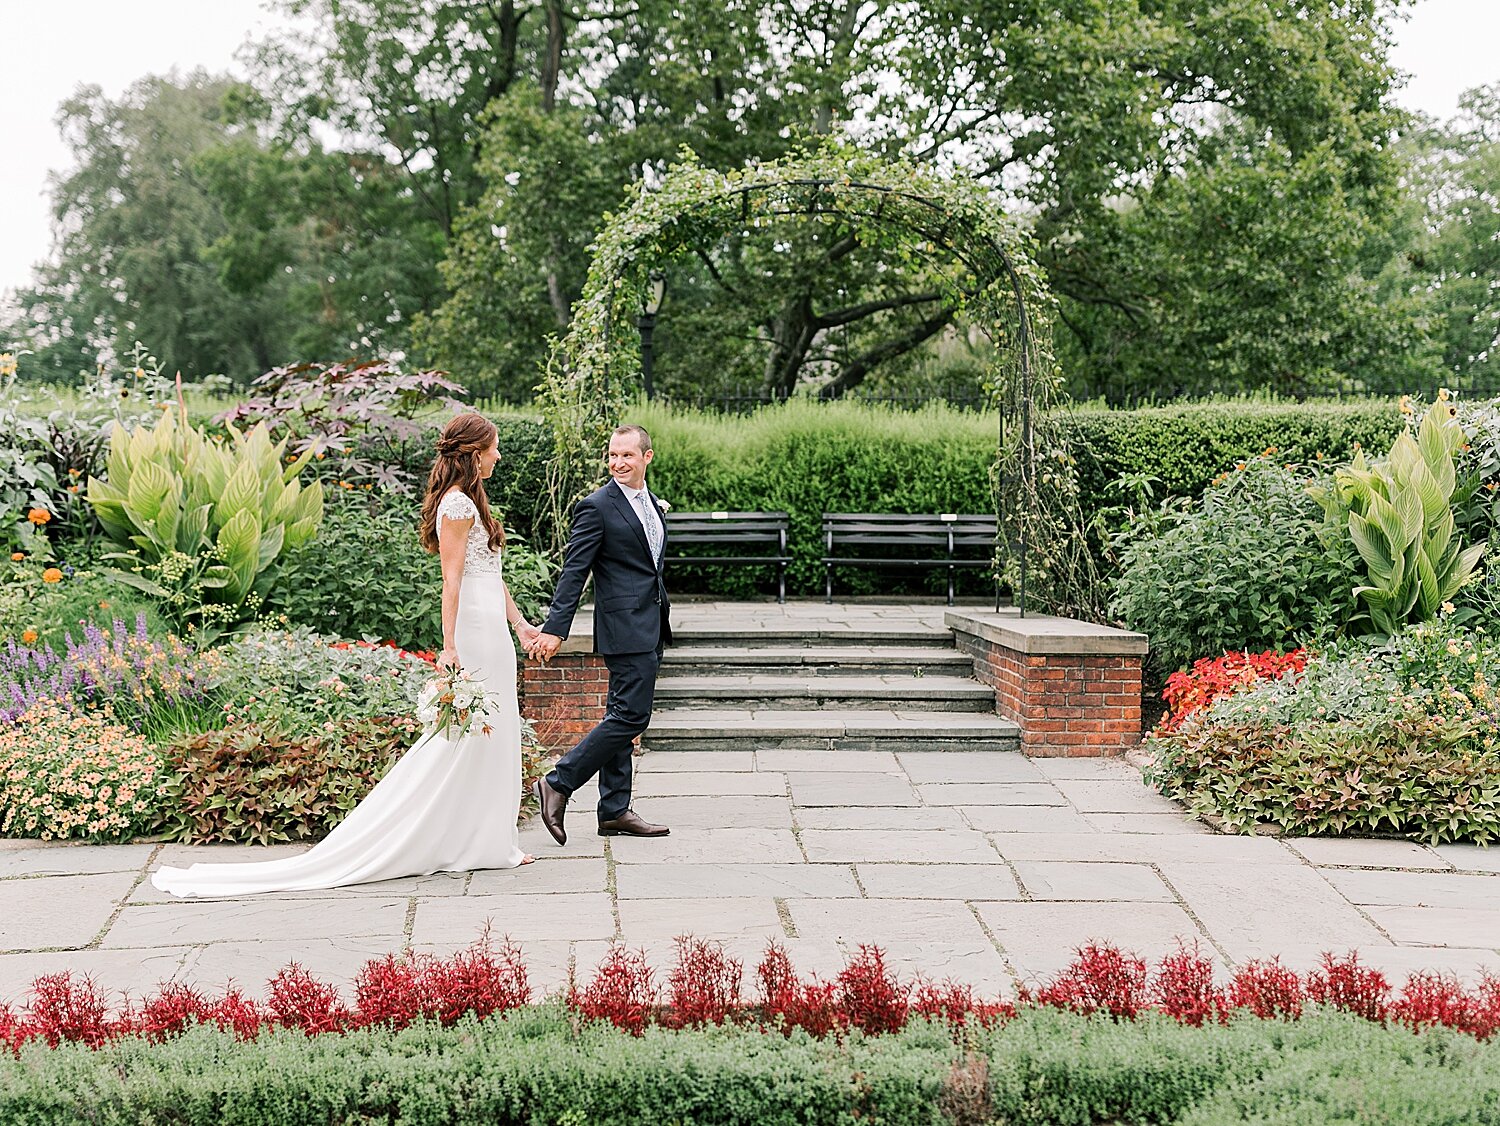 bride and groom walk through Conservatory Gardens | Asher Gardner Photography | Elopement at the Central Park Conservatory Gardens